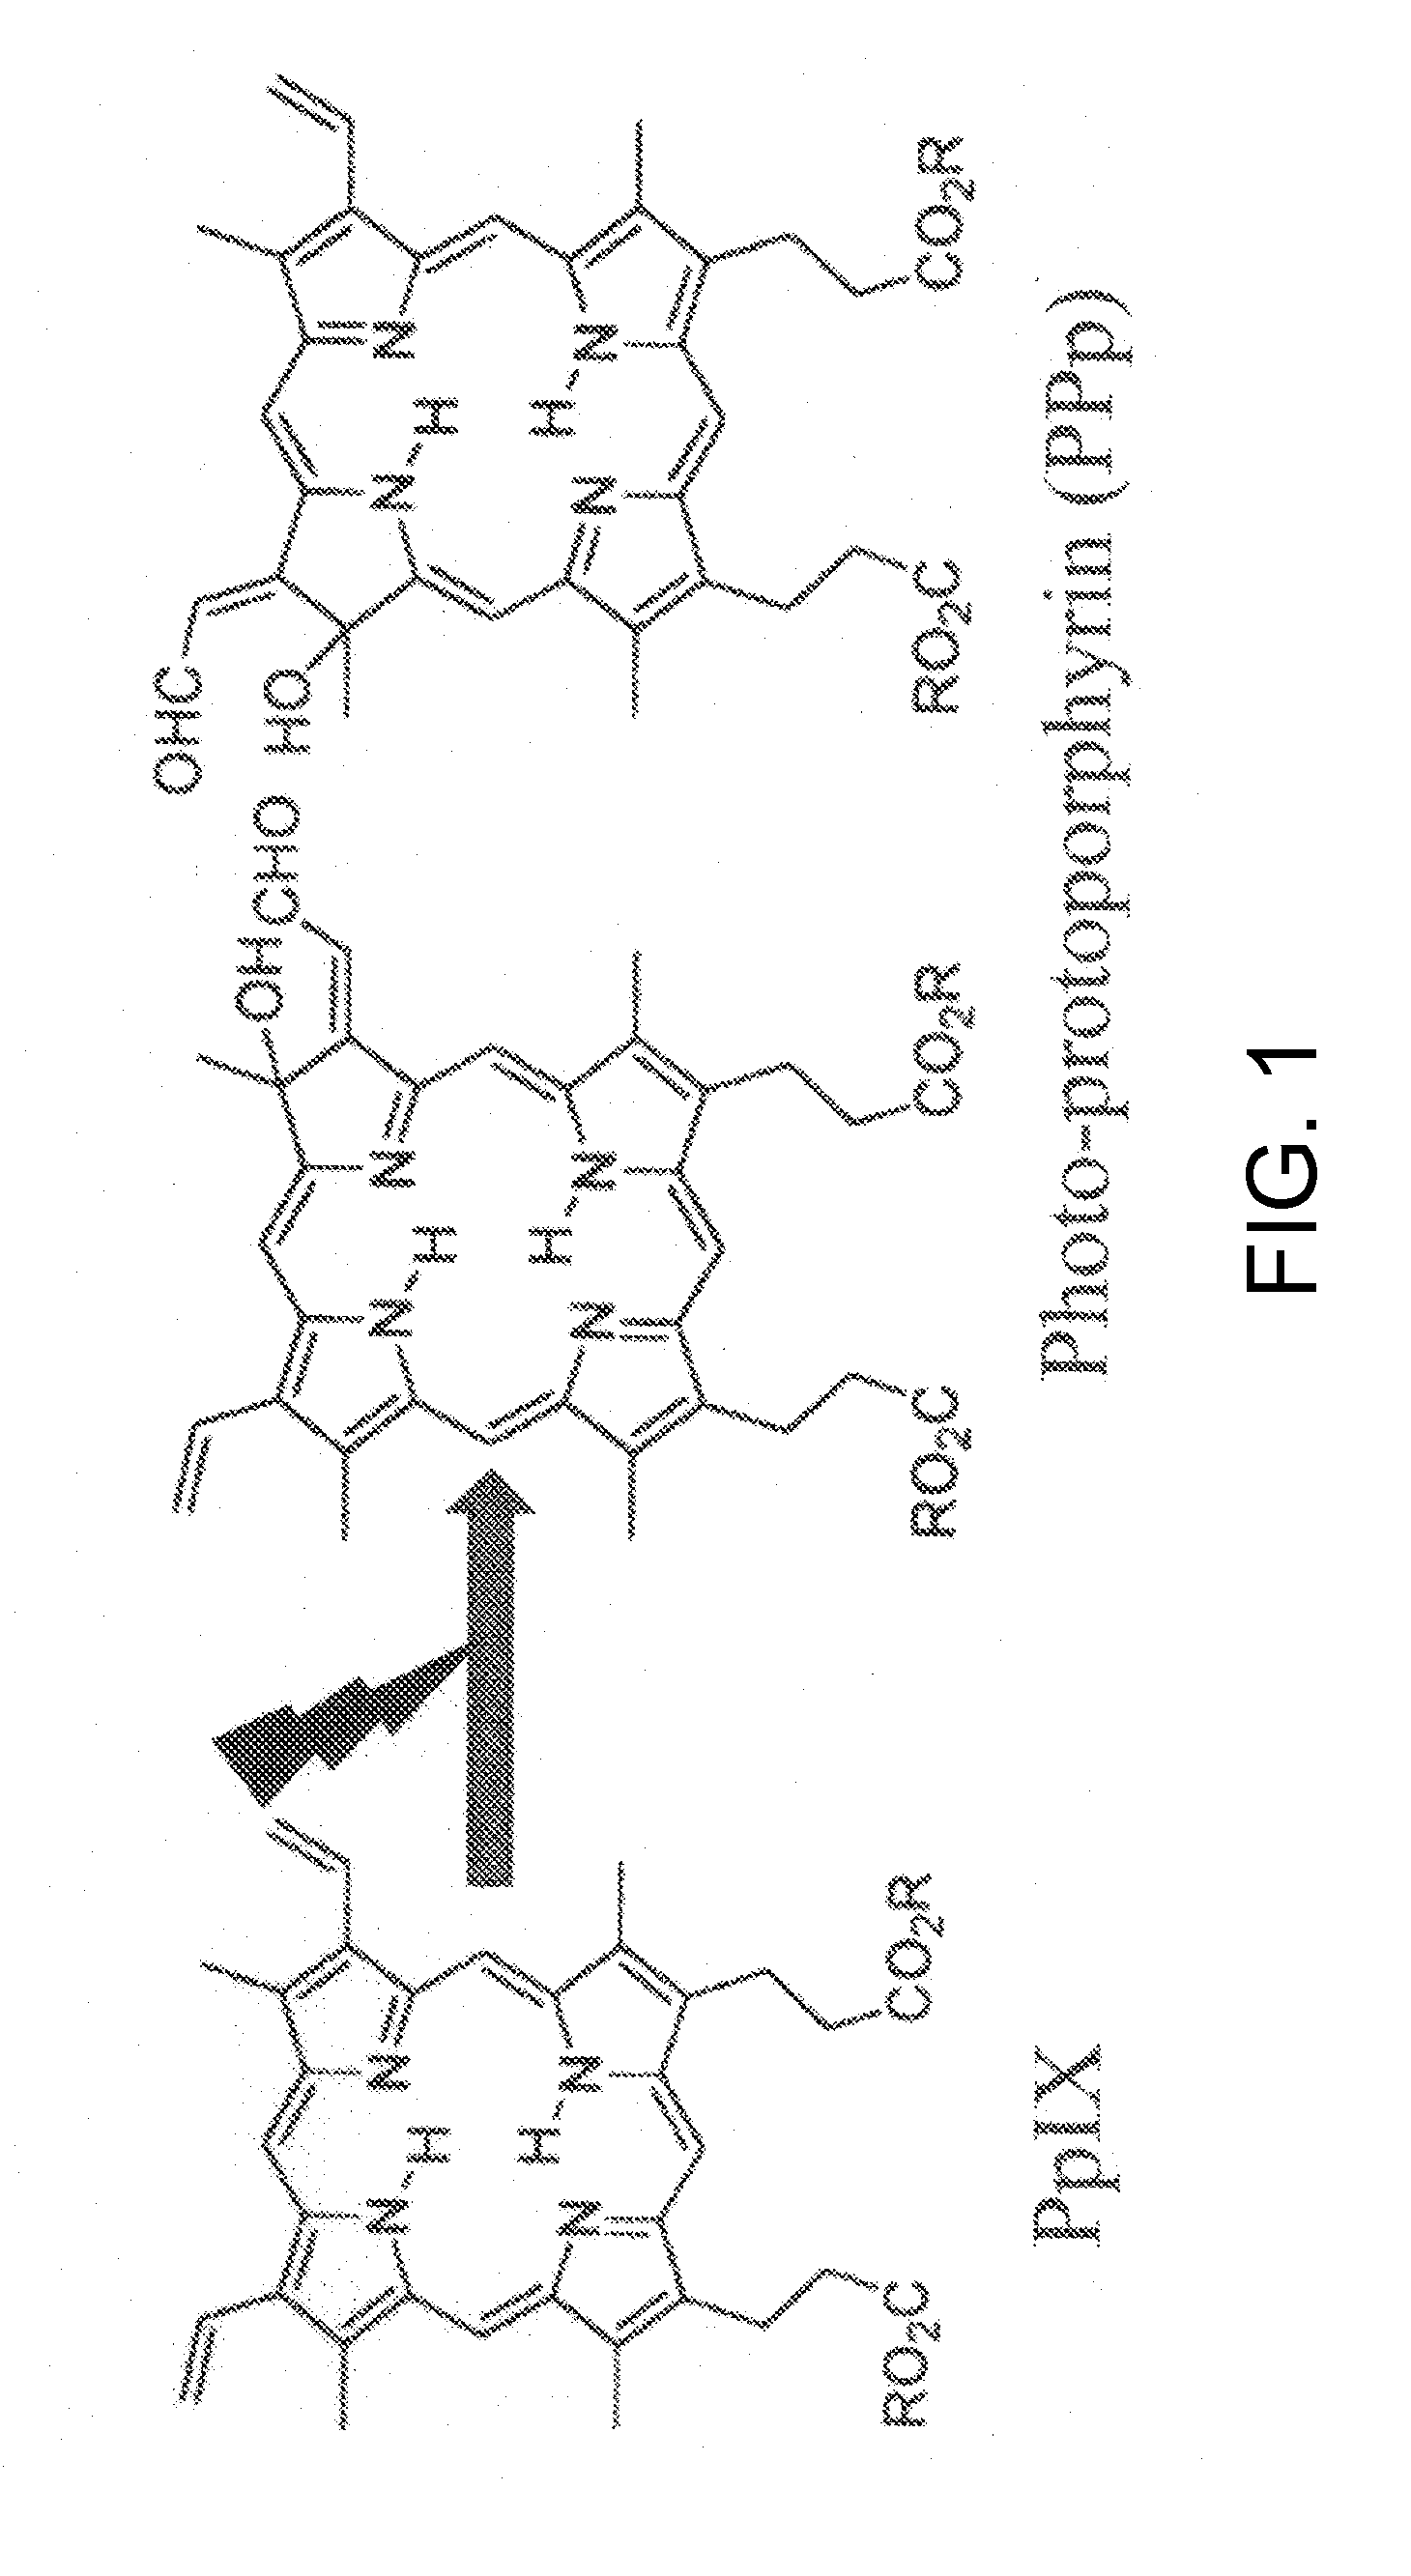 Tumor site or parathyroid gland identification device and method